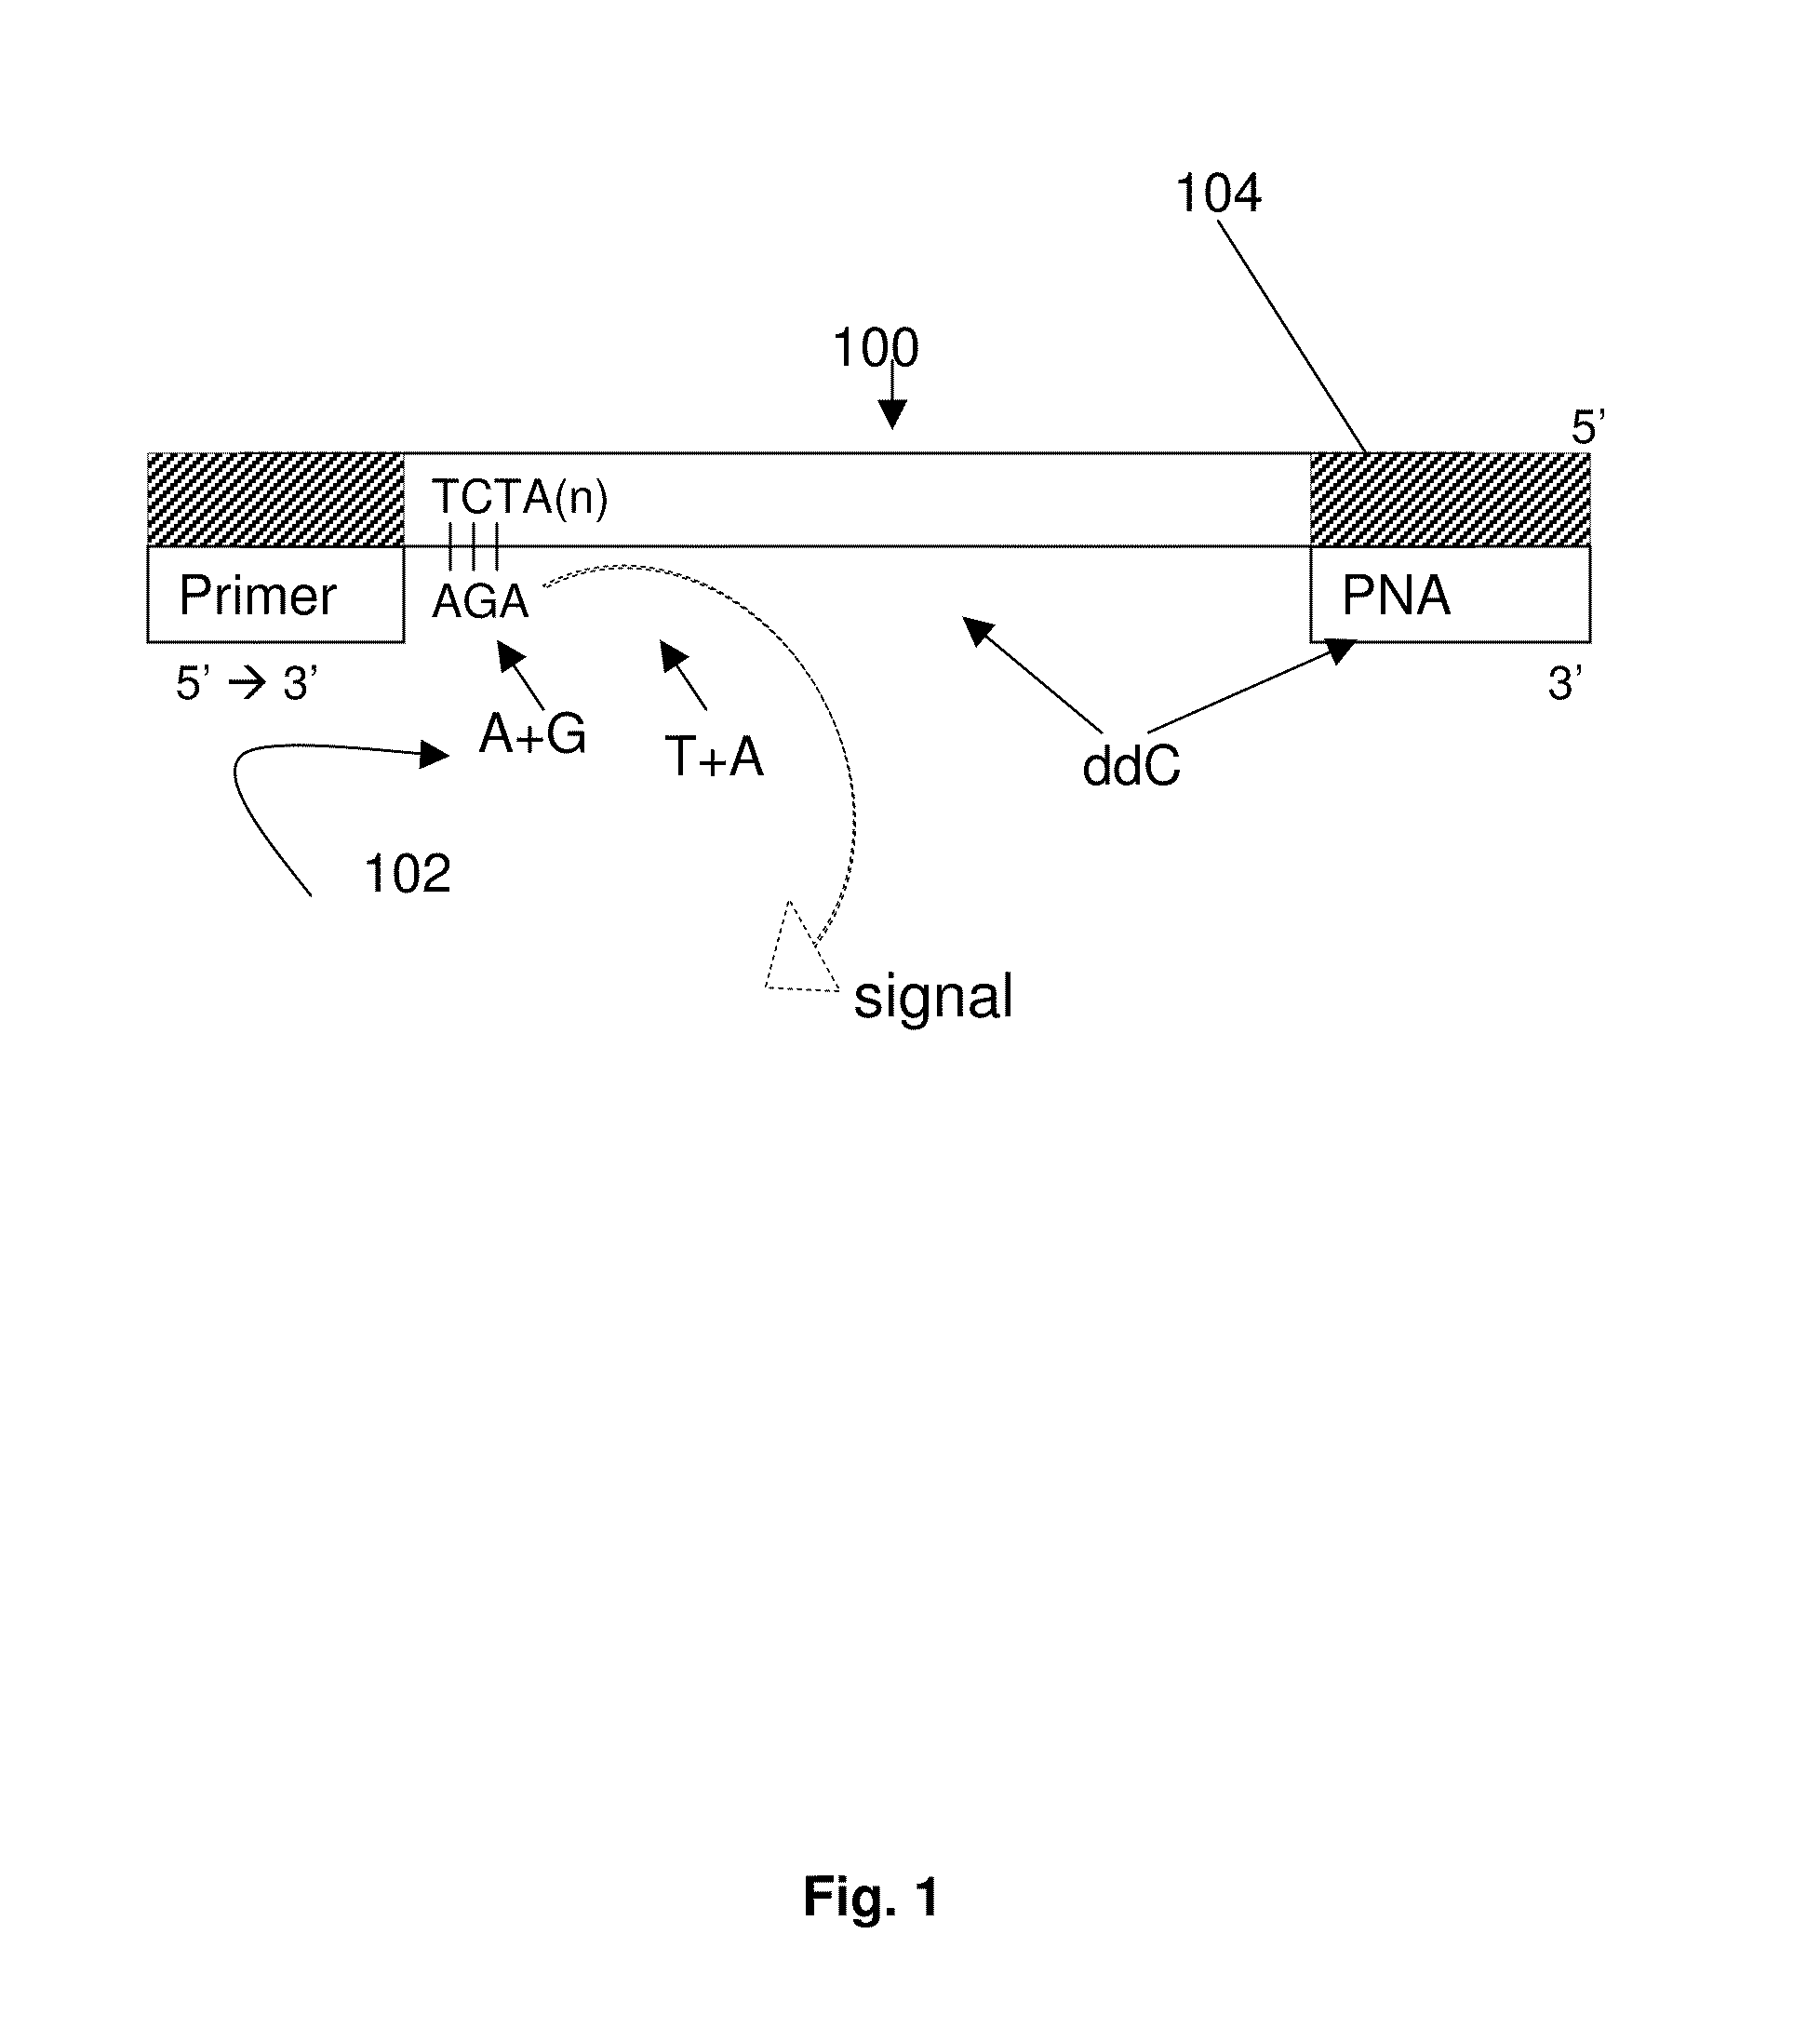 DNA template tailoring using PNA and modified nucleotides